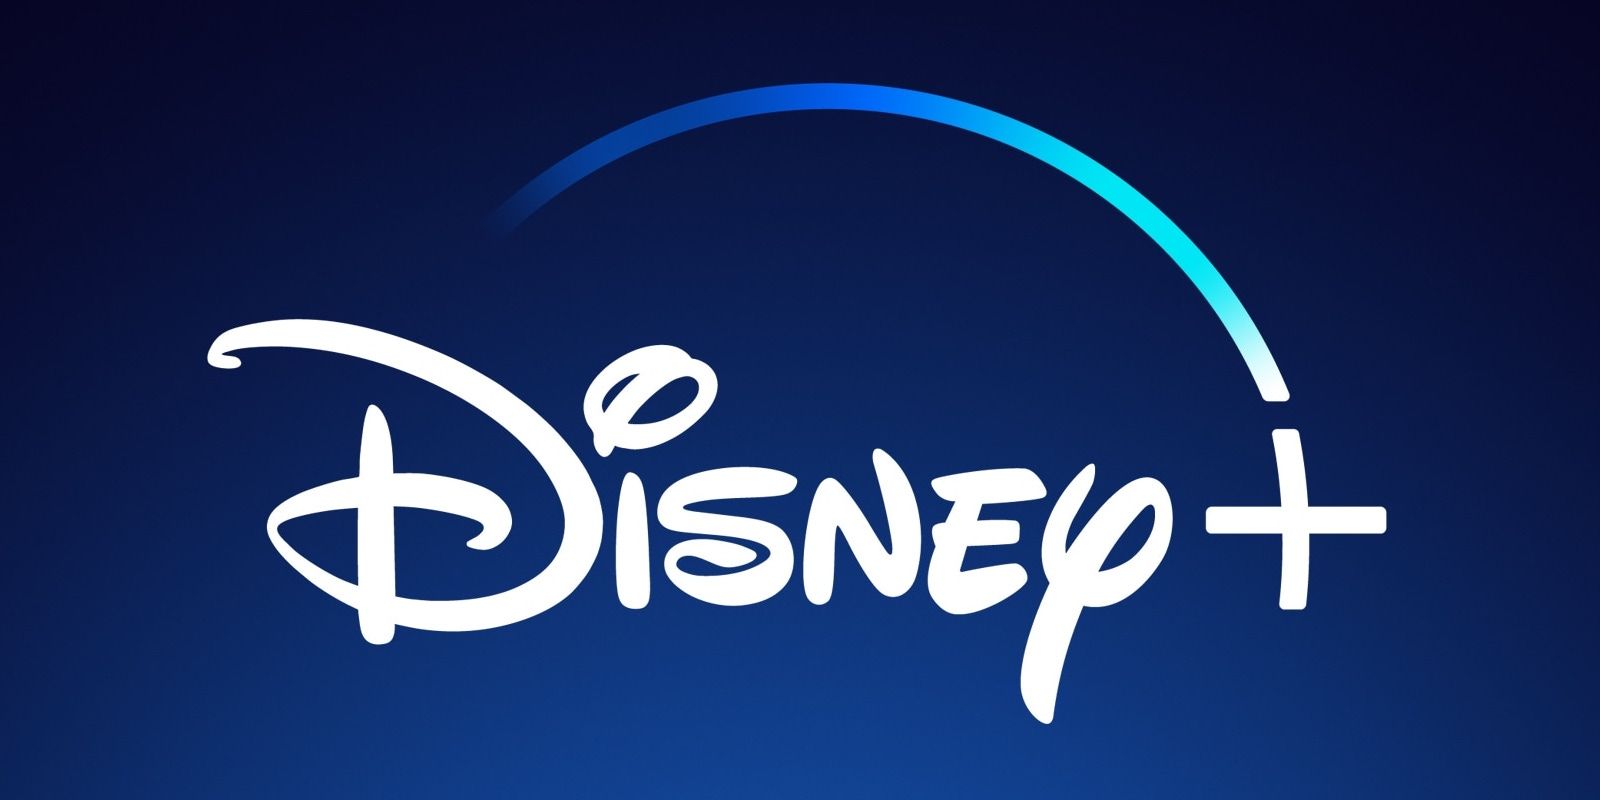 Disney+: Every New Movie & TV Show Coming In May 2022